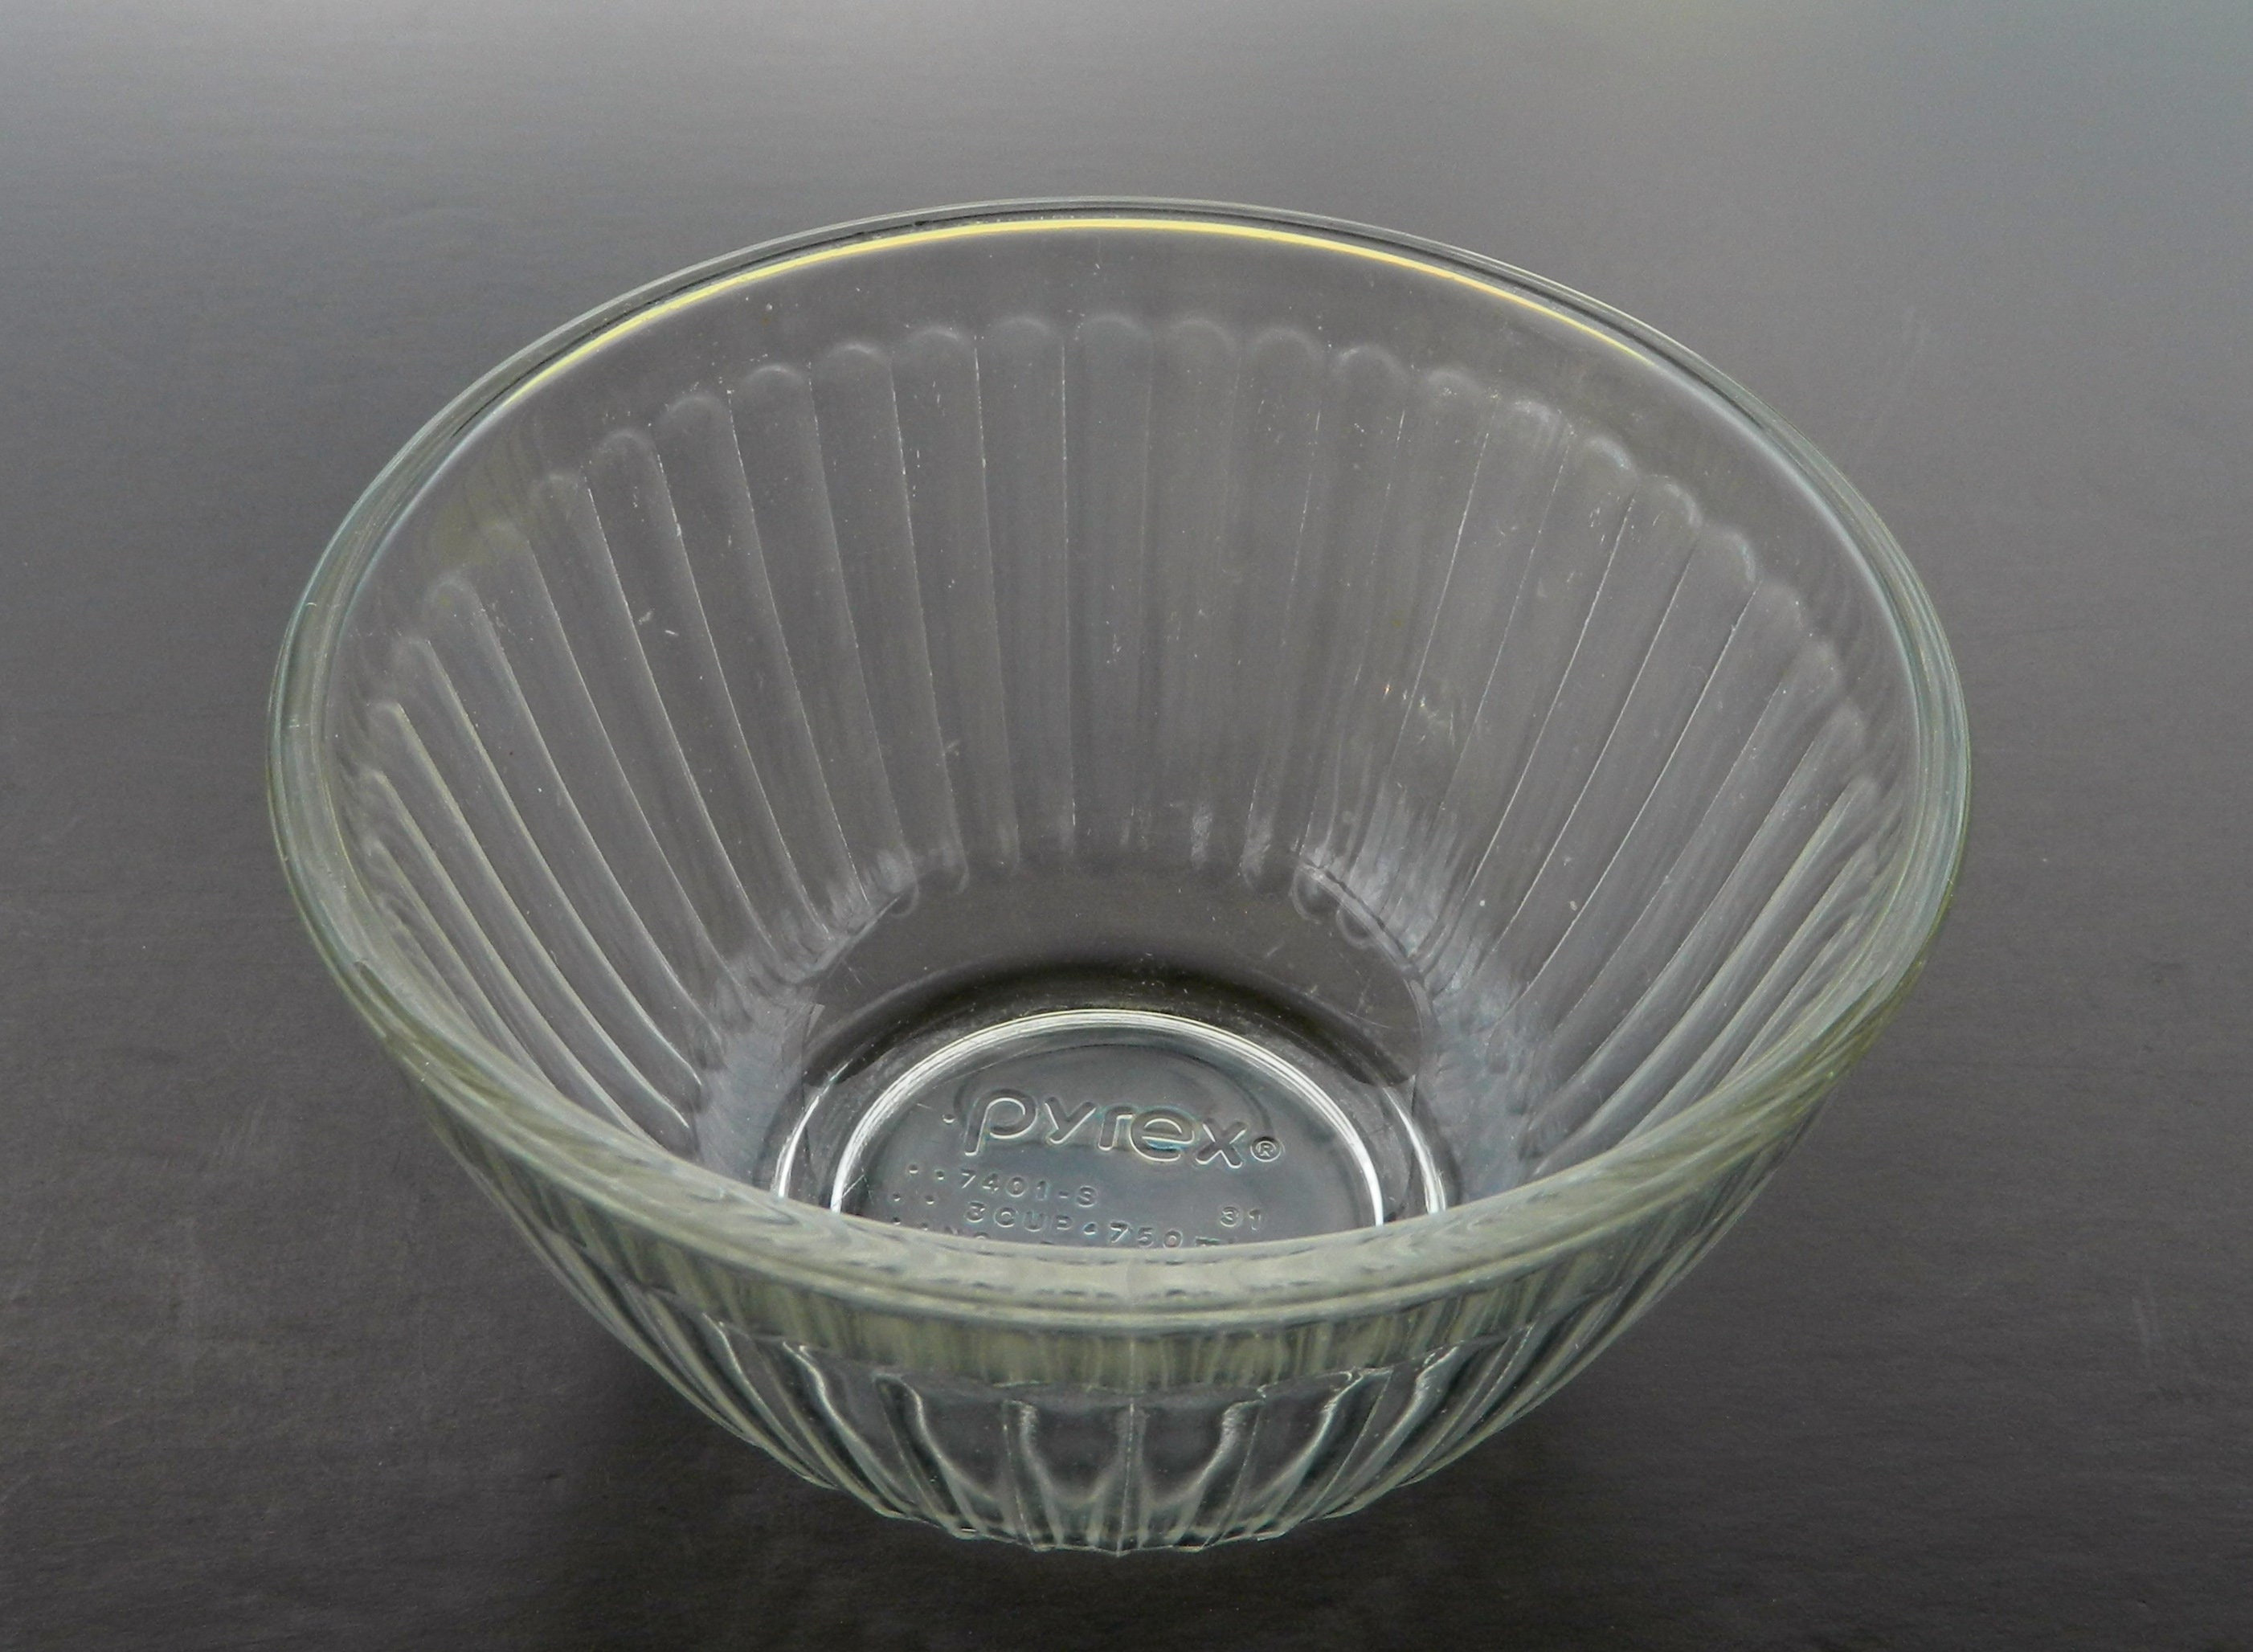 Pyrex 7401 3-Cup Sculpted Glass Mixing Bowl